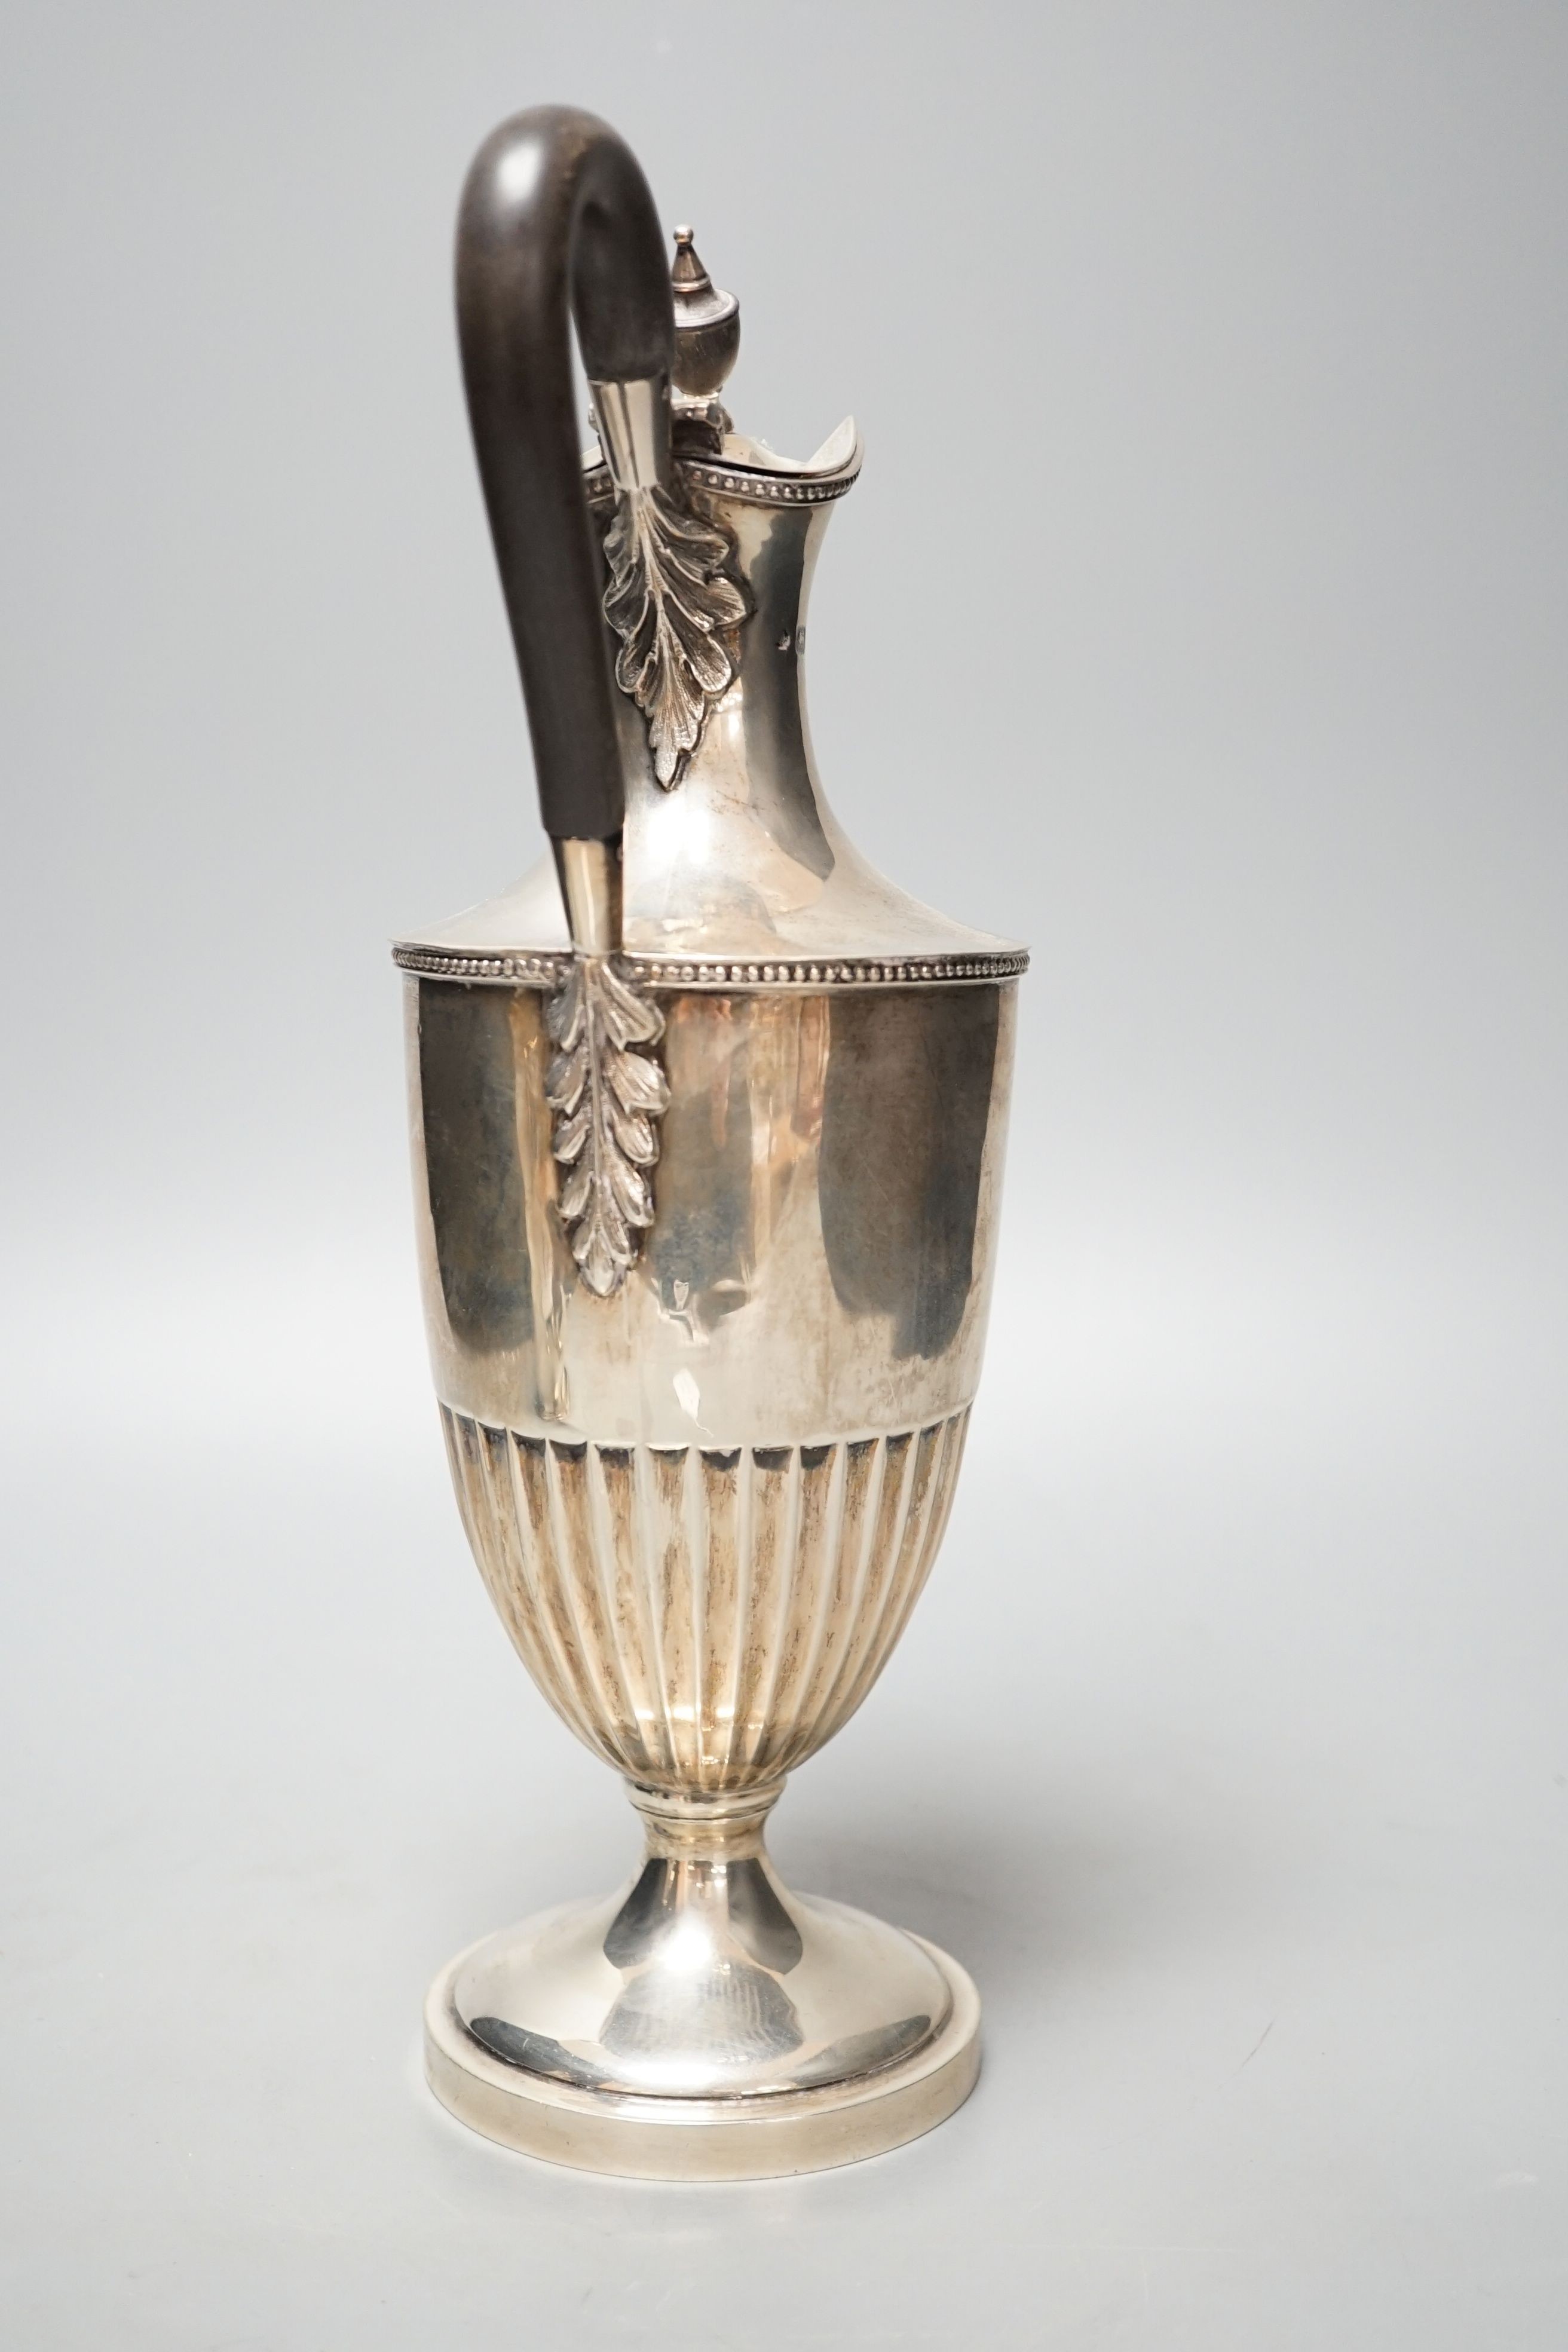 An Edwardian silver hot water jug, by William Hutton & Sons, London, 1901, height 30.7cm, gross weight 18.5oz.